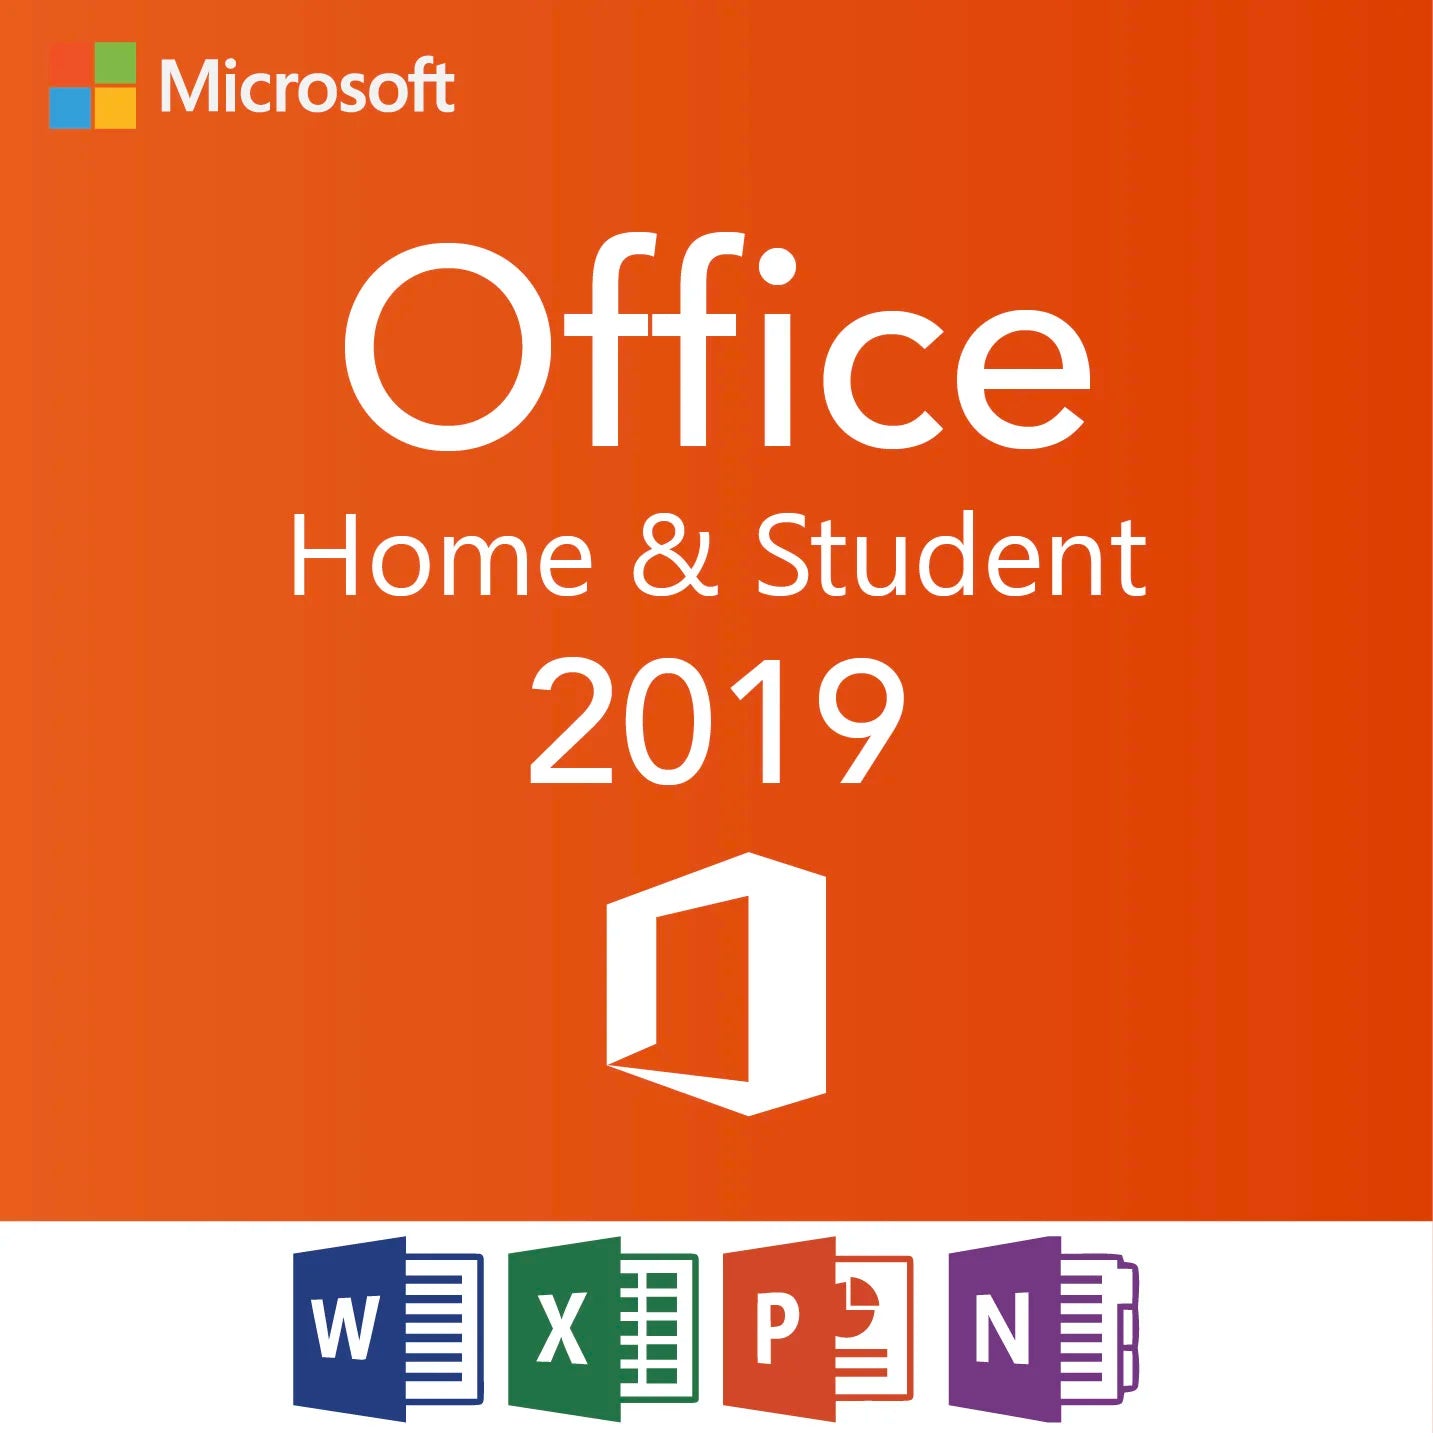 Microsoft Office 2019 Home & Student for Windows